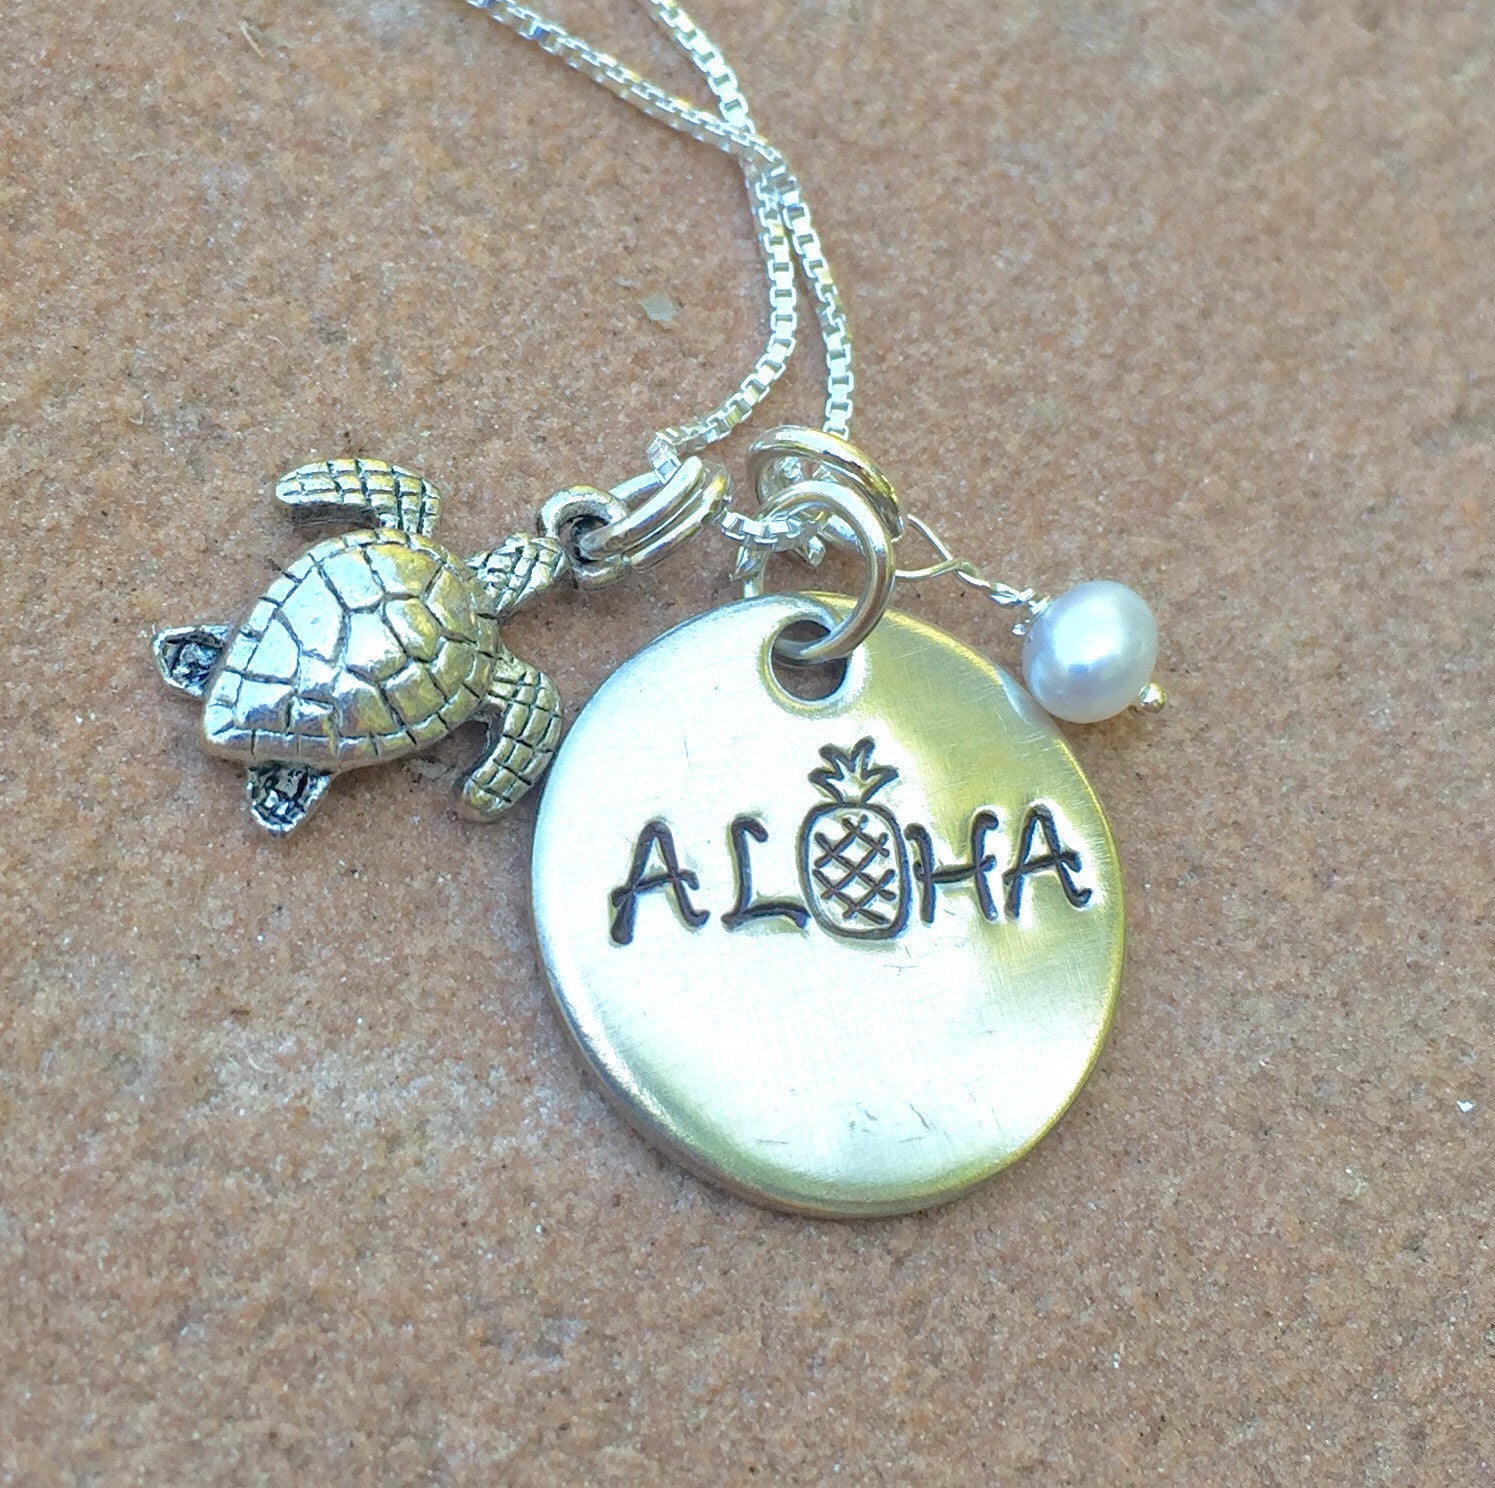 Hawaiian Jewelry, Hawaiian Necklace, Pineapple Necklace, Aloha Pineapple Necklace , Hawaii, Aloha Necklace, natashaaloha - Natashaaloha, jewelry, bracelets, necklace, keychains, fishing lures, gifts for men, charms, personalized, 